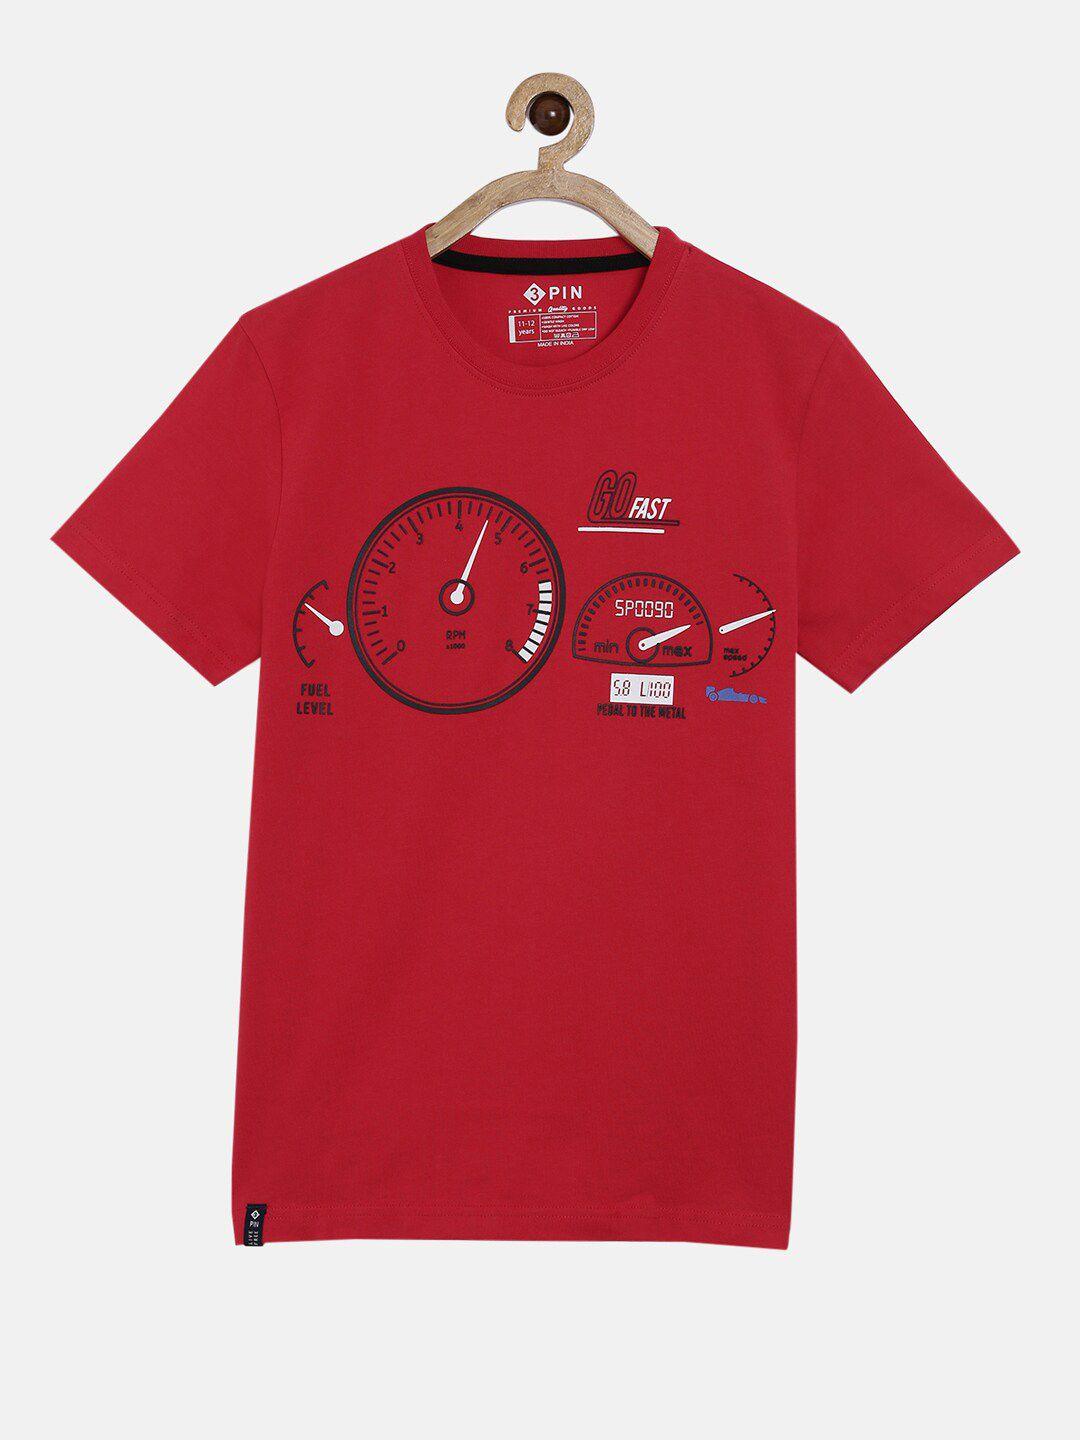 3pin boys red typography printed v-neck applique t-shirt